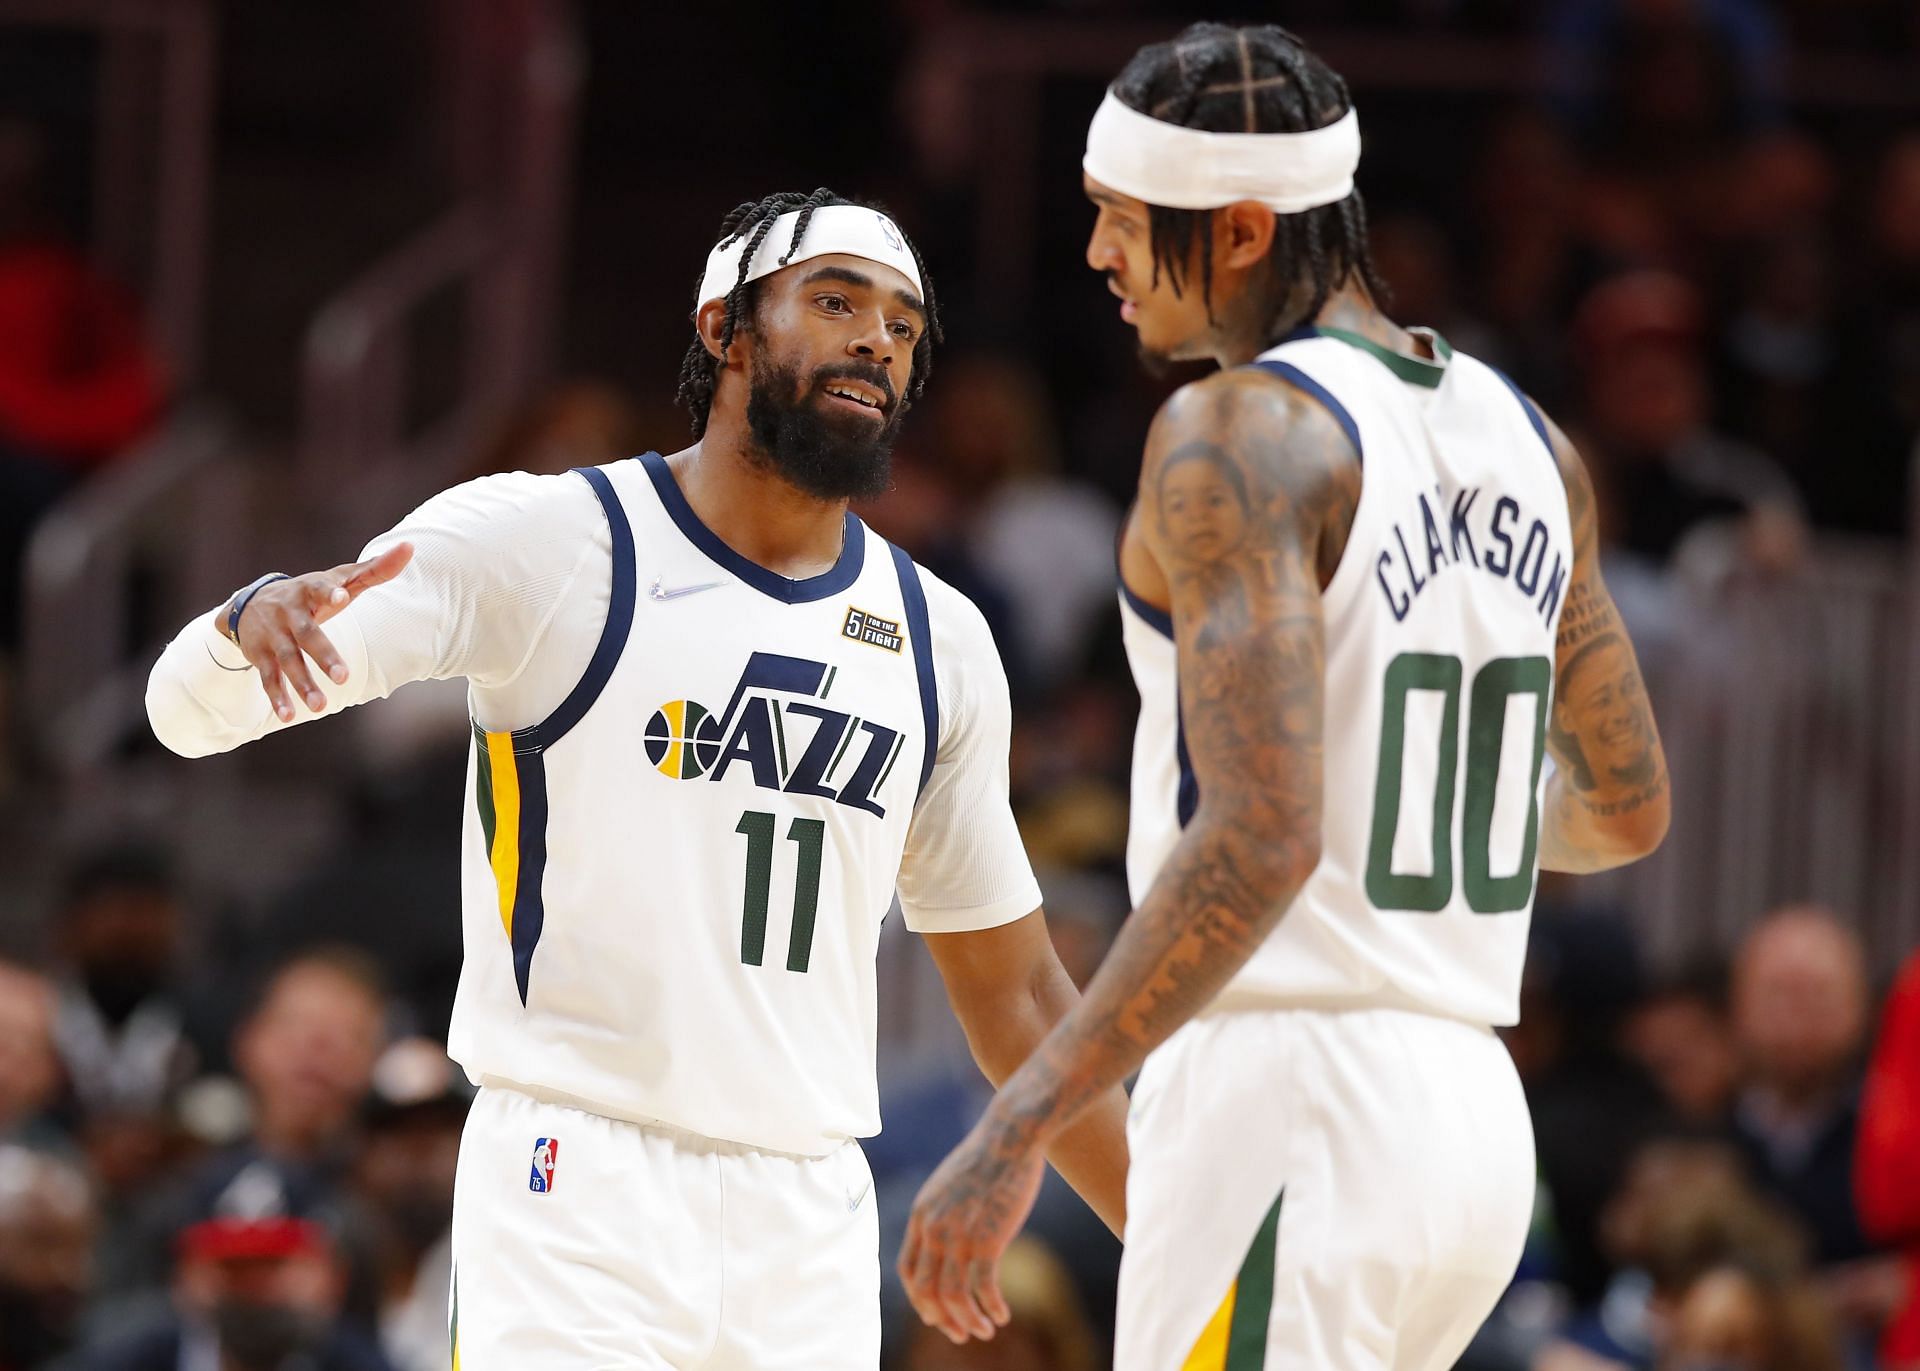 Mike Conley and Jordan Clarkson celebrate a play during the Utah Jazz vs Chicago Bulls game